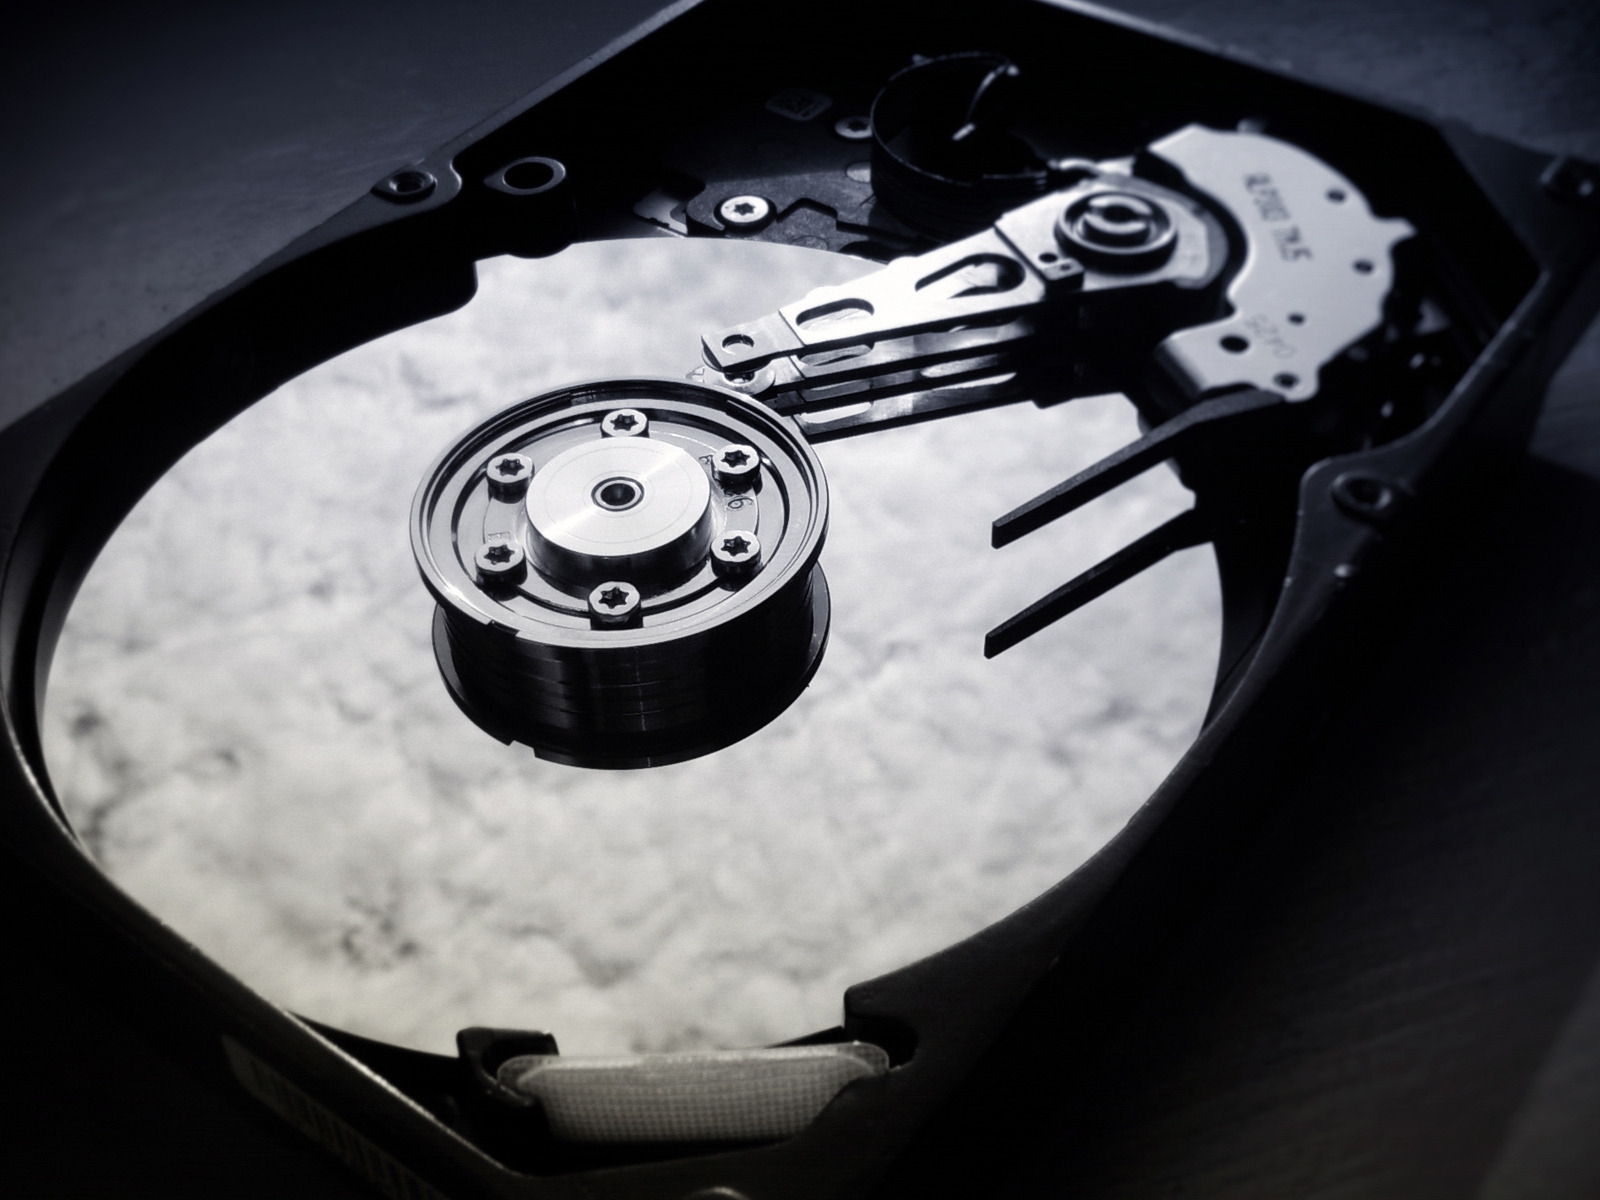 Hard Disk Drive for 1600 x 1200 resolution